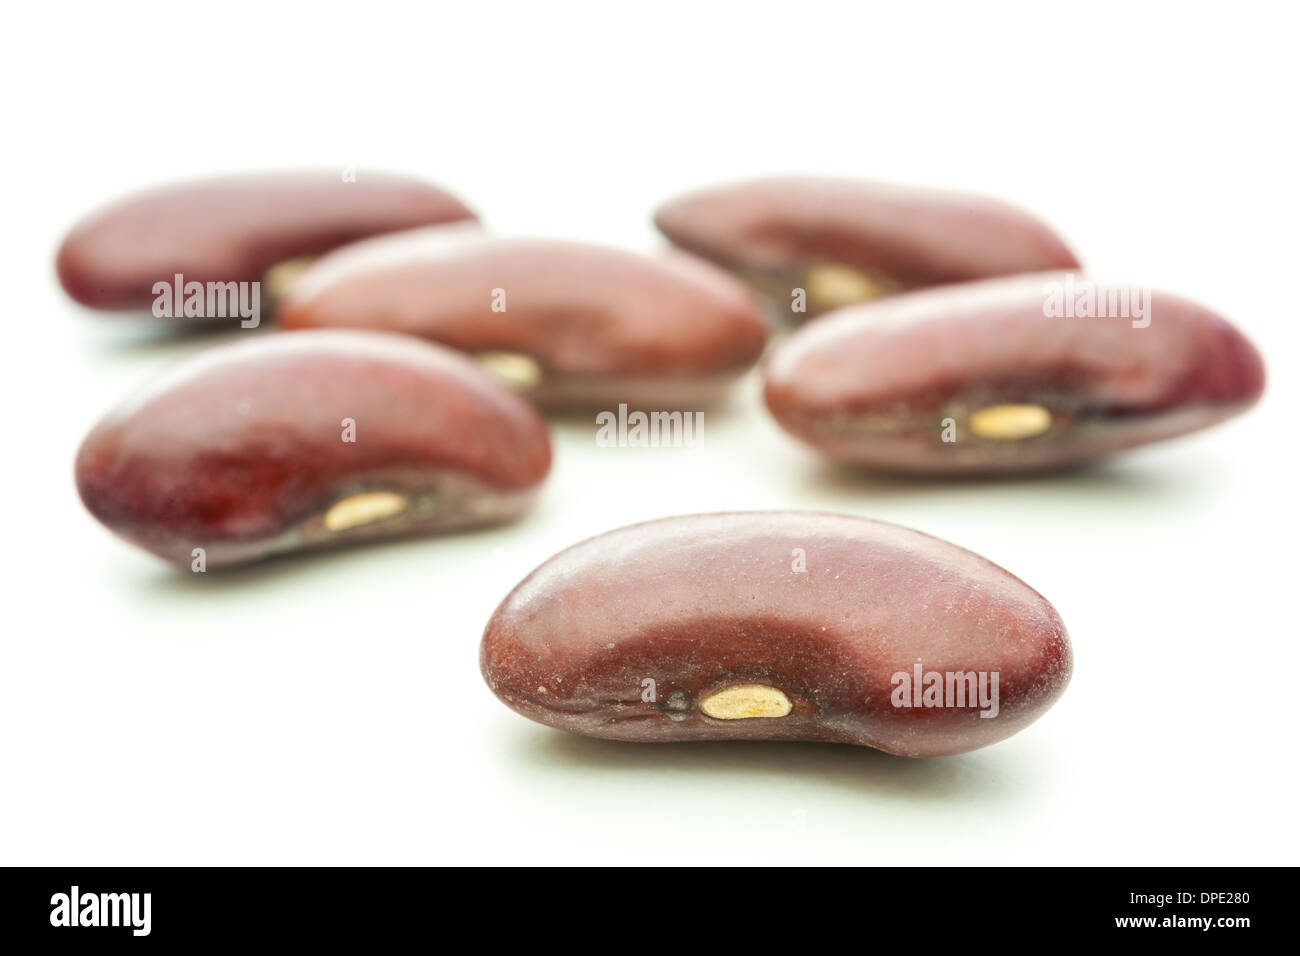 Kidney beans on a white background Stock Photo